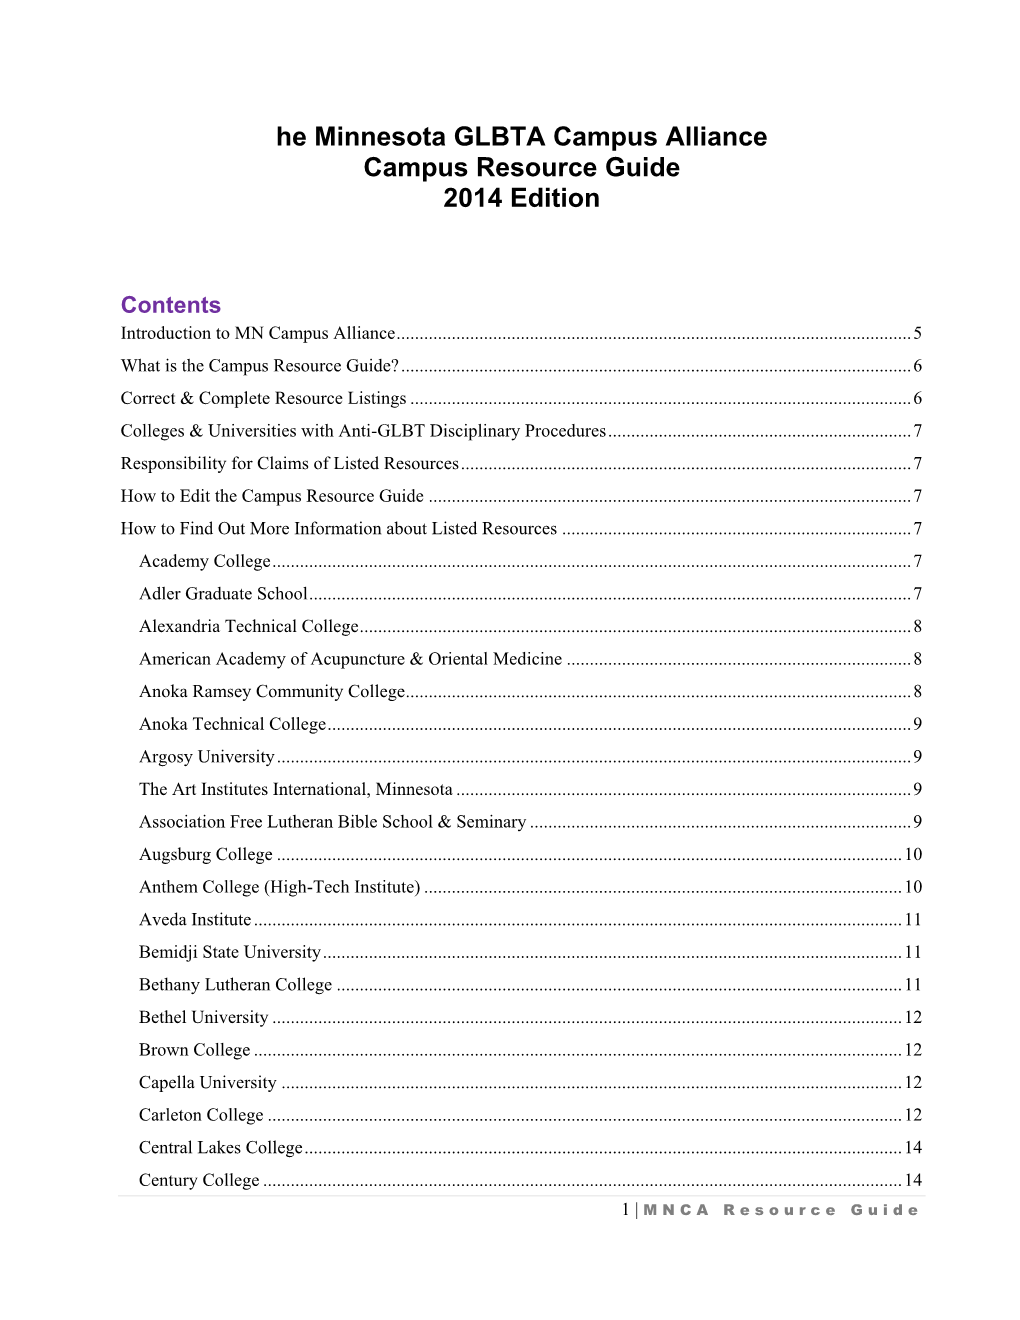 Updated Resource Guide .Docx